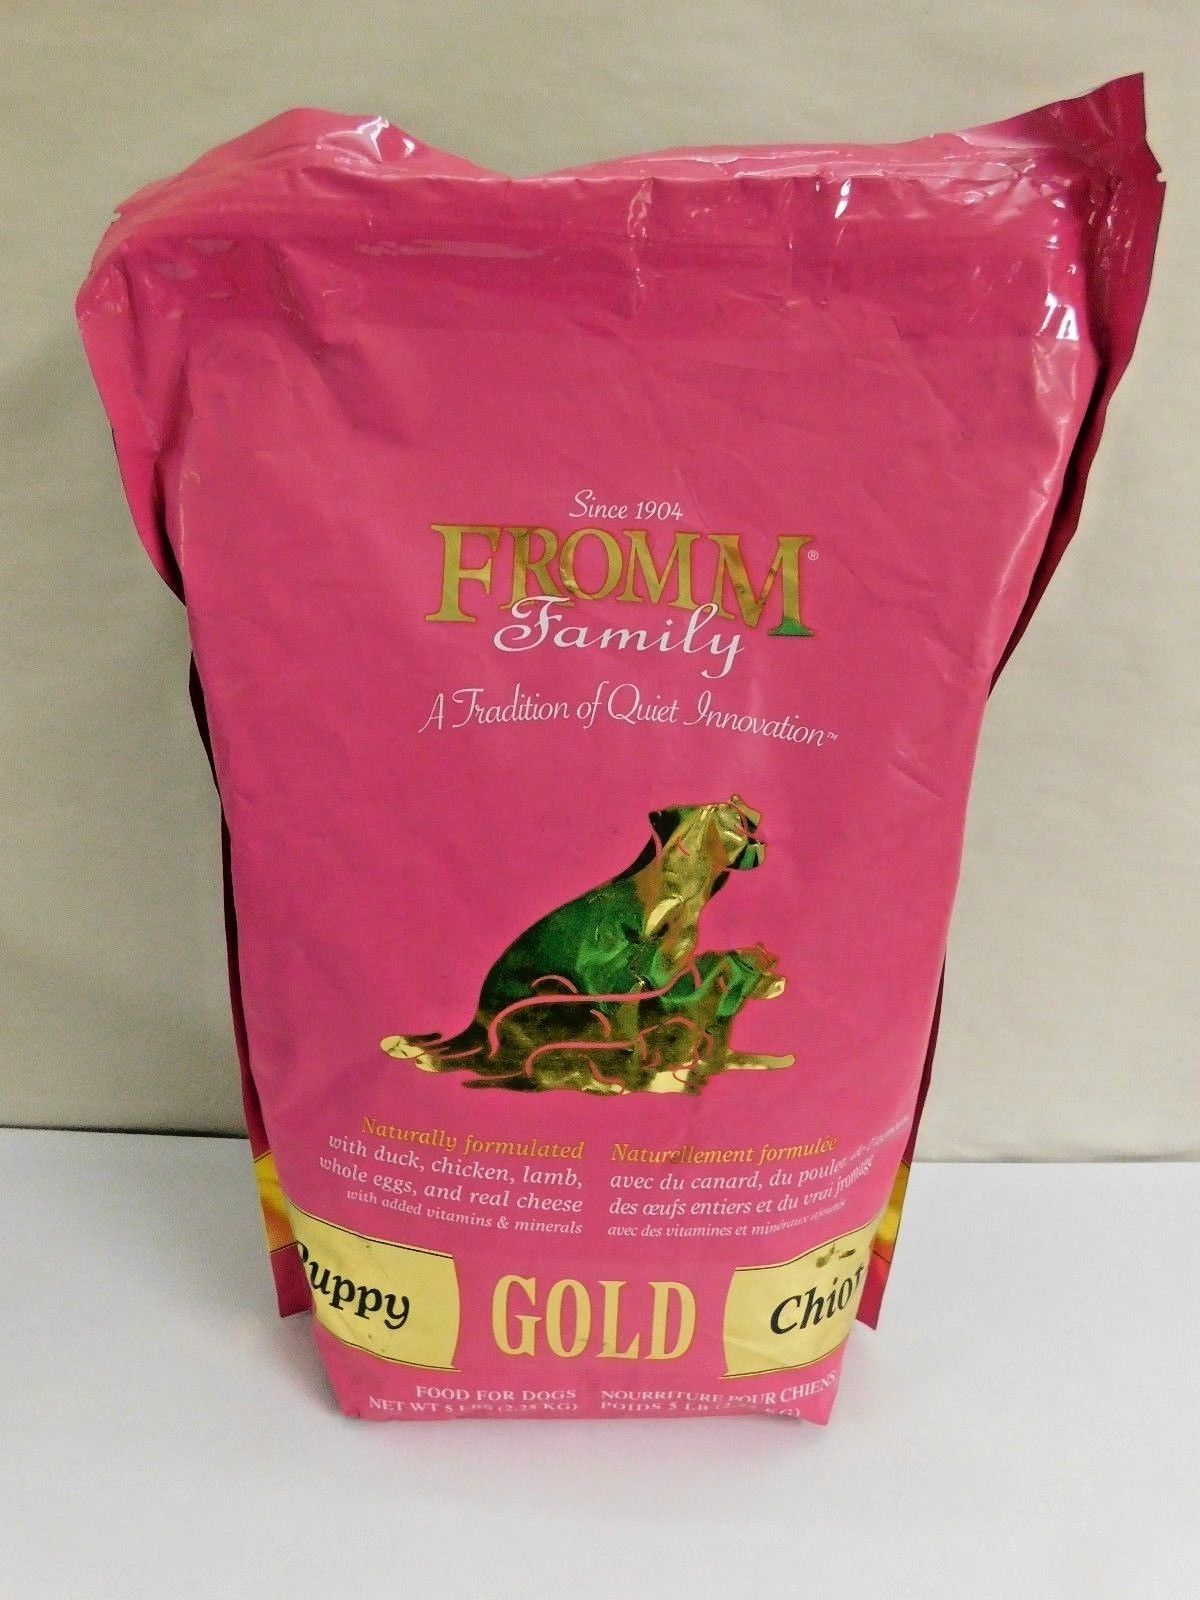 Fromm Puppy Gold Dry Dog Food 5-Pound Bag Made In U.S.A Exp 2019 - Dog Food